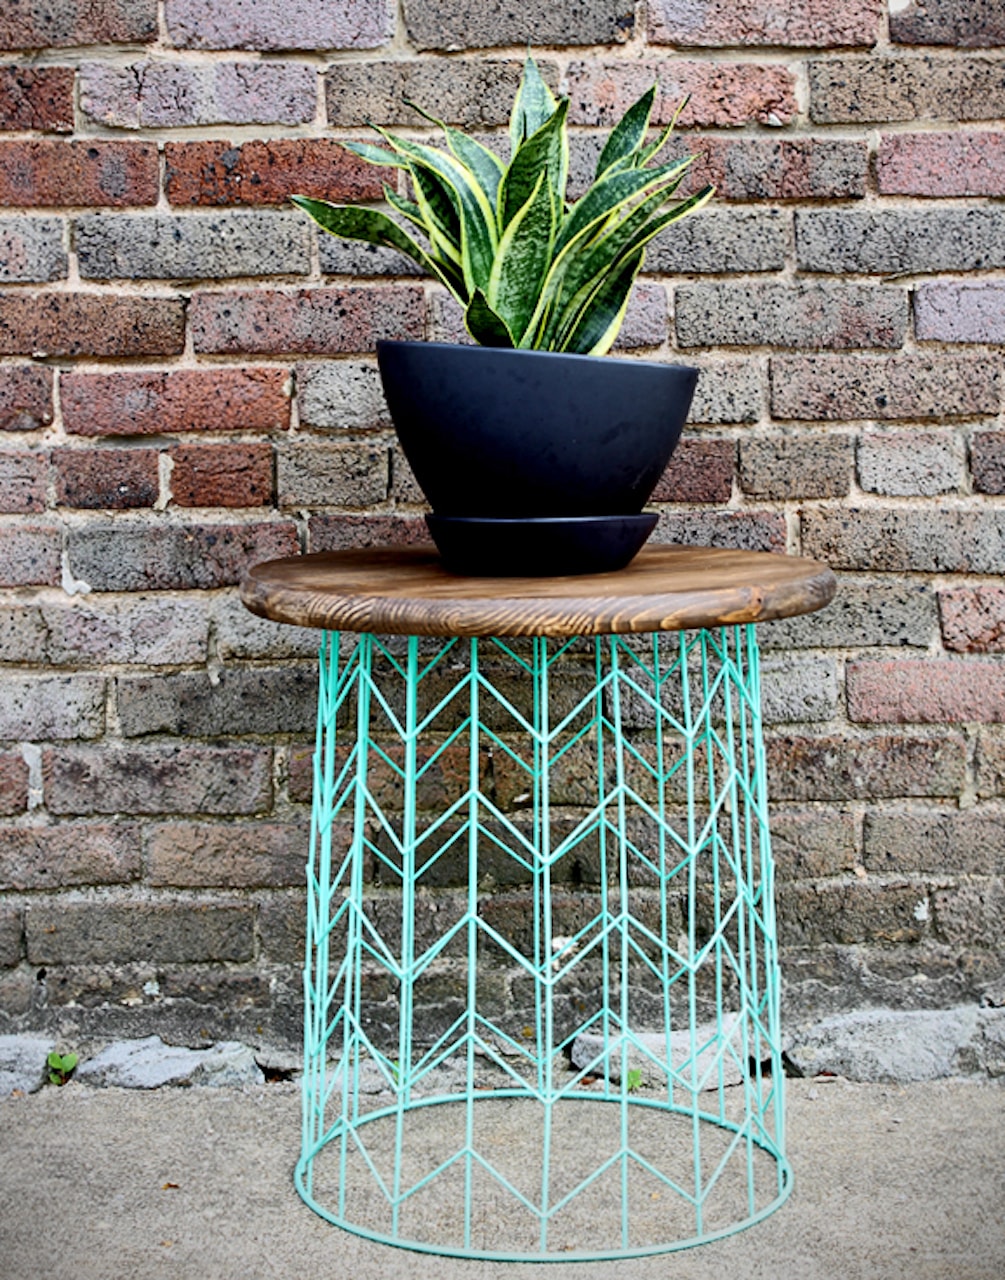 DIY recycling projects upcycled home decor wire basket table